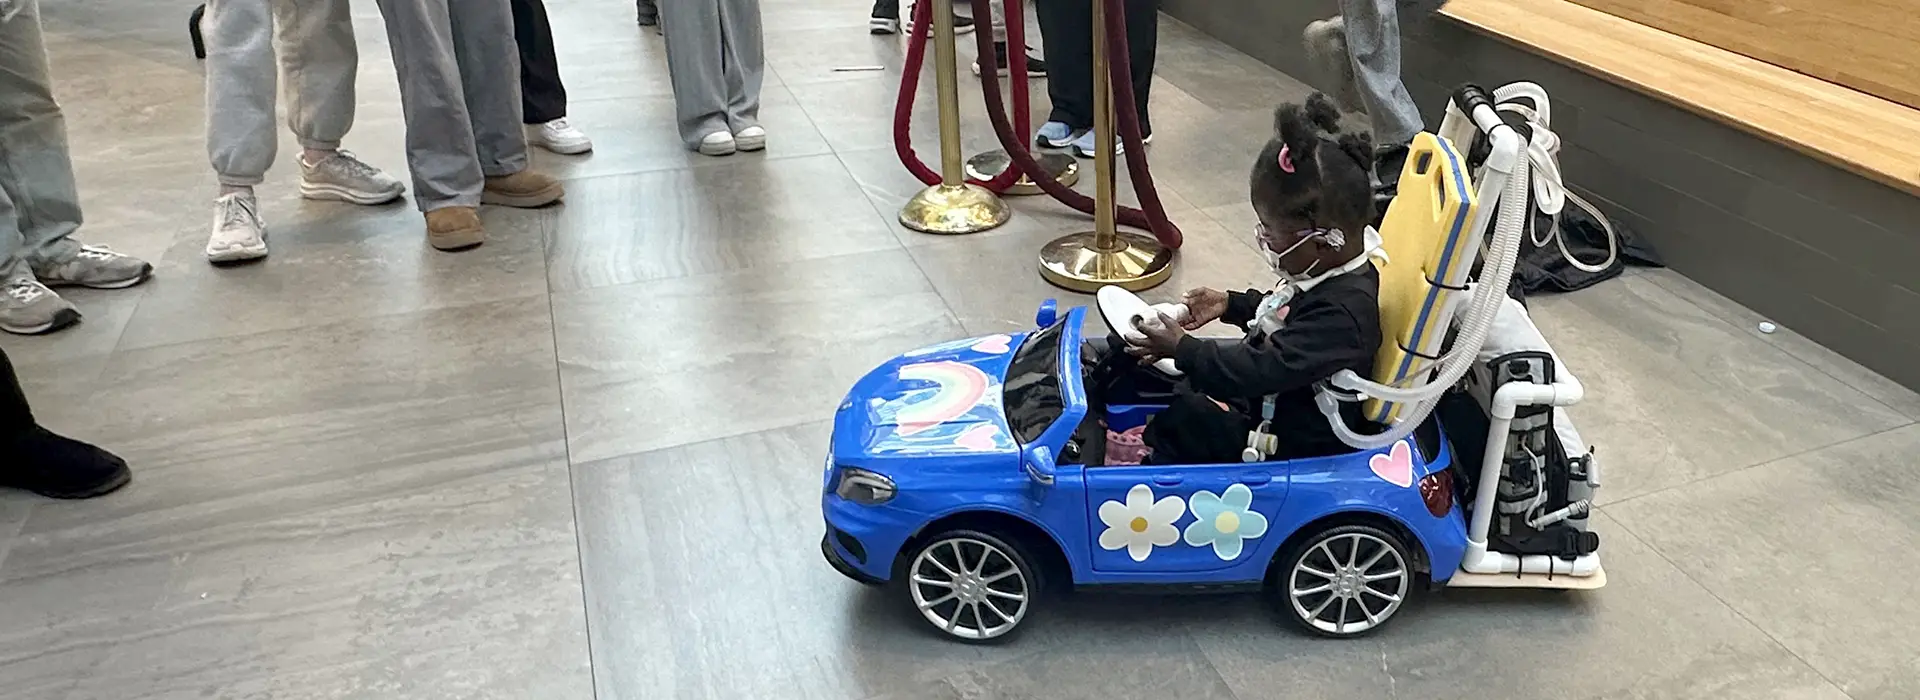 GoBabyGo Ride-On Cars Enhance Children's Development and Social Participation